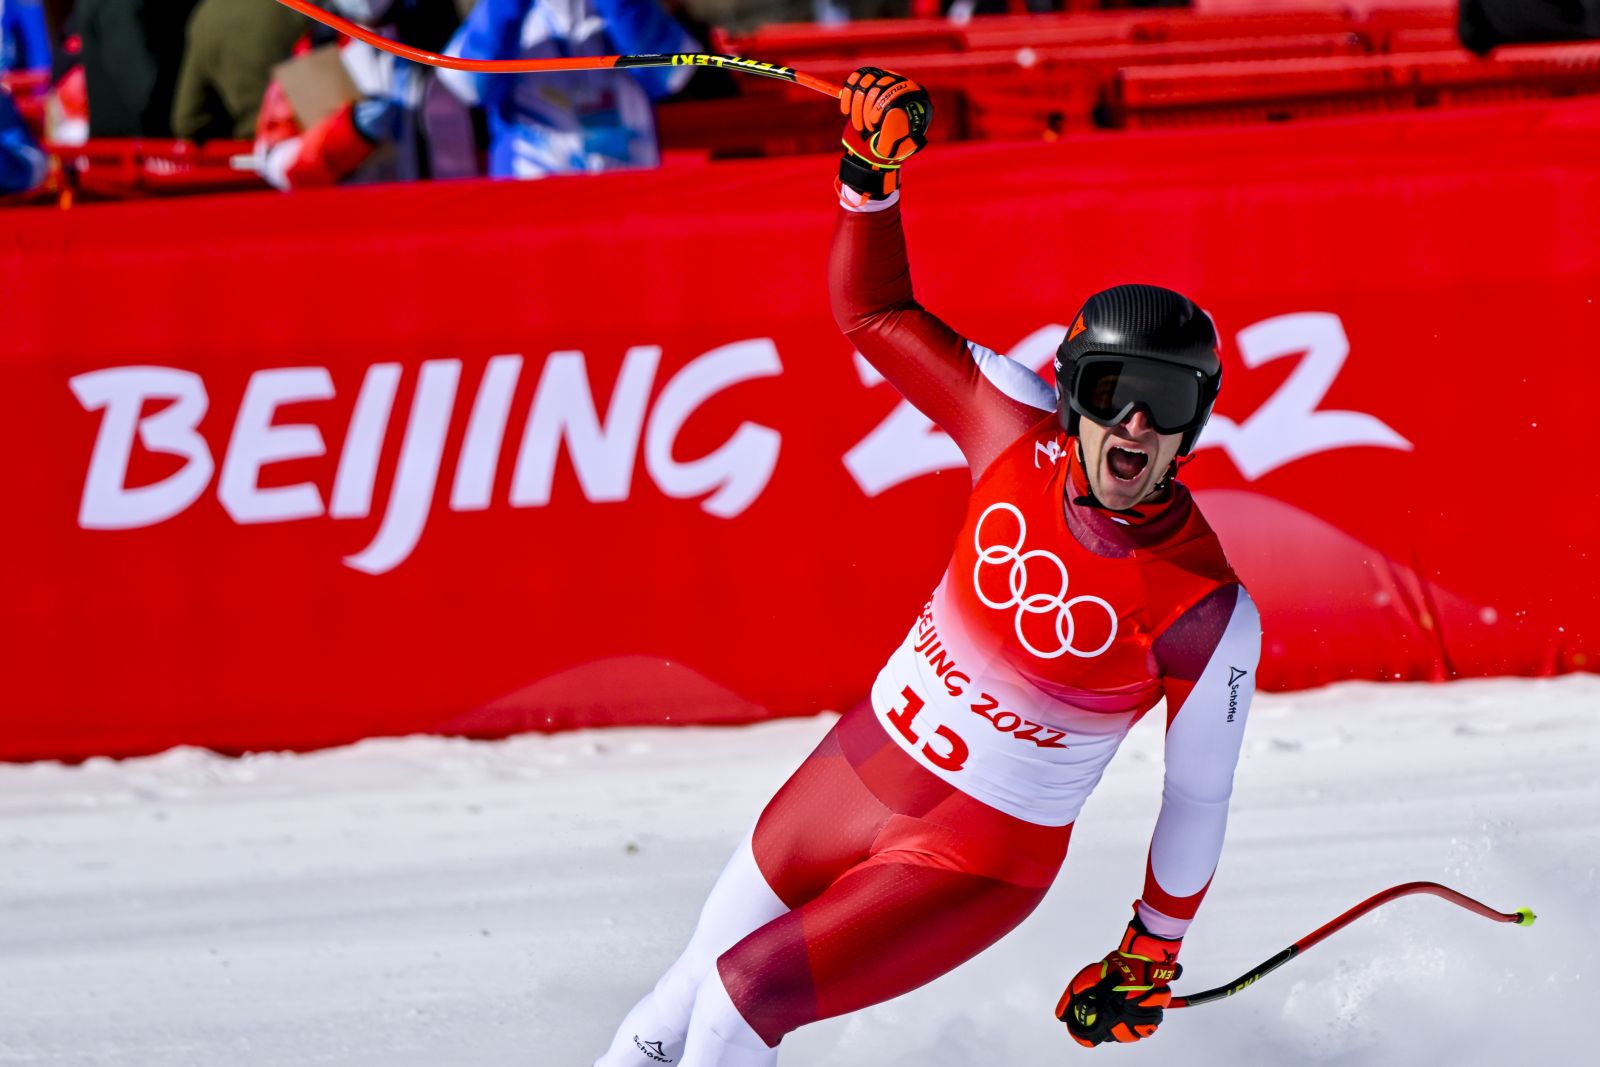 epa09737333 Matthias Mayer of Austria celebrates after his run in the Men's Super-G race of the Alpine Skiing events of the Beijing 2022 Olympic Games at the Yanqing National Alpine Ski Centre Skiing, Beijing municipality, China, 08 February 2022.  EPA/JEAN-CHRISTOPHE BOTT